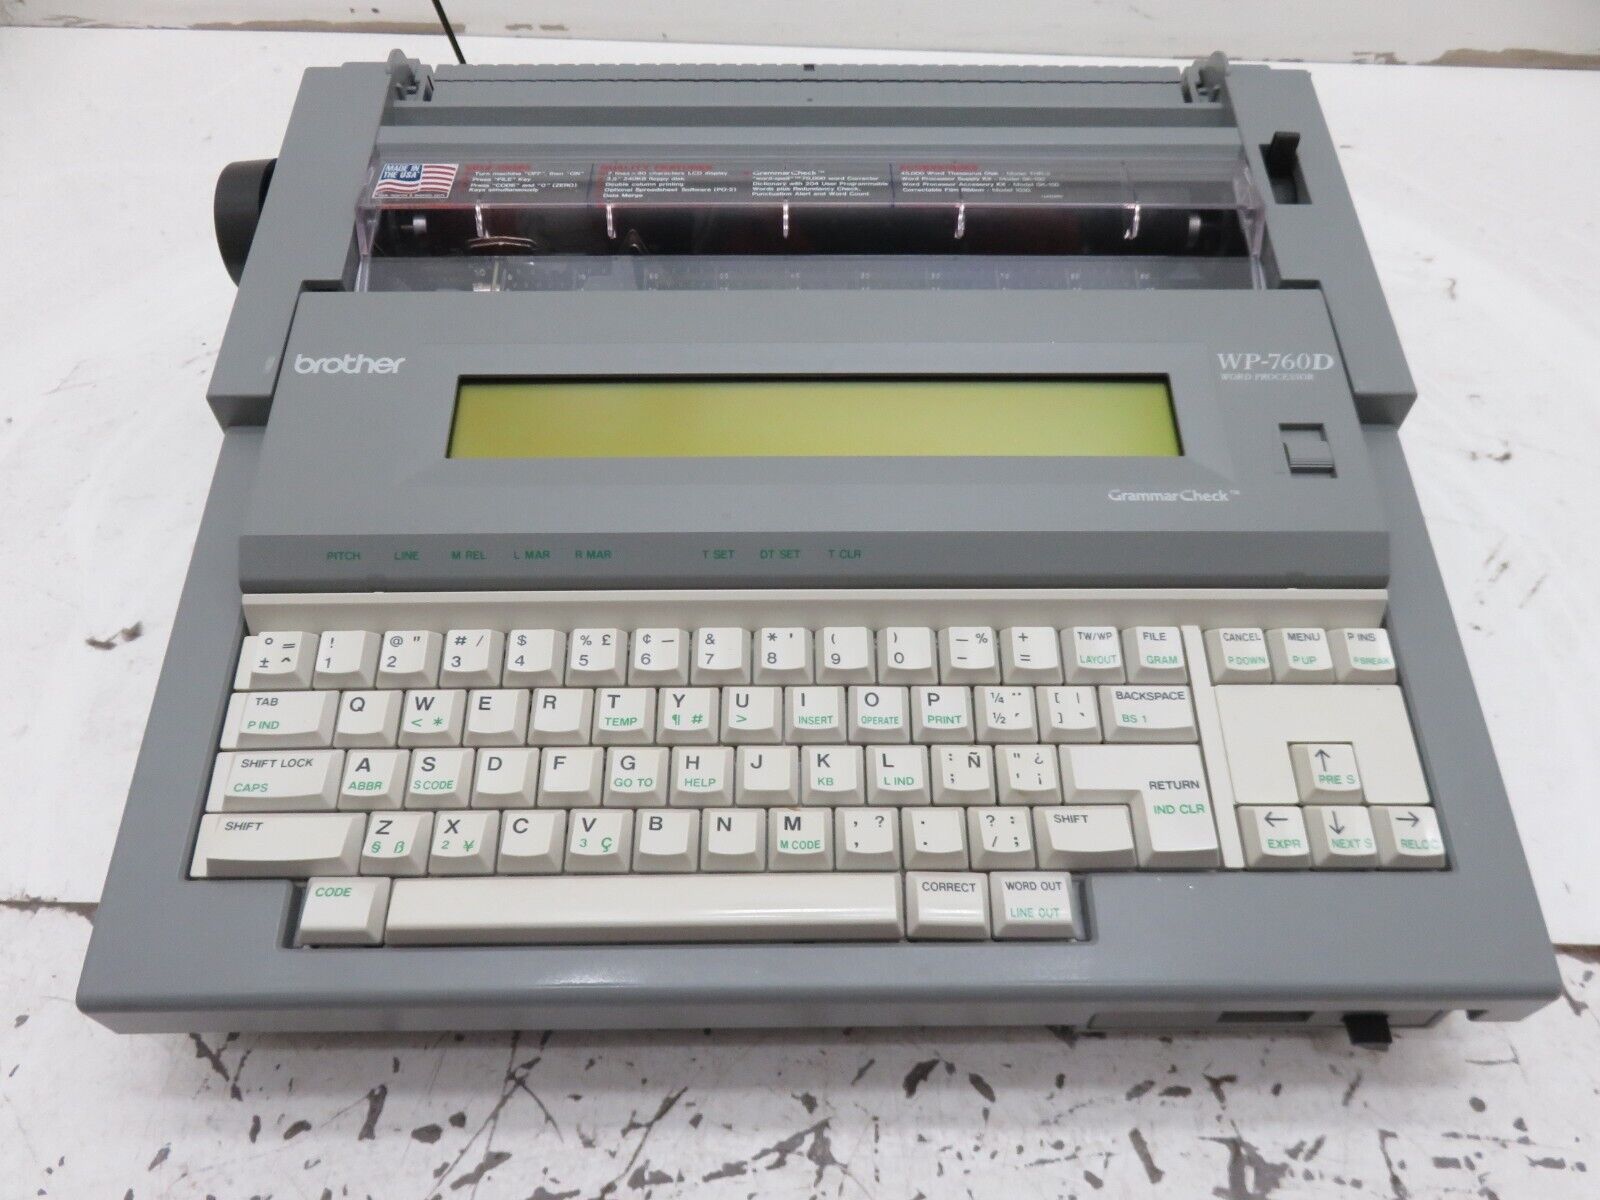 Brother WP-760D Word Processor Electronic Typewriter